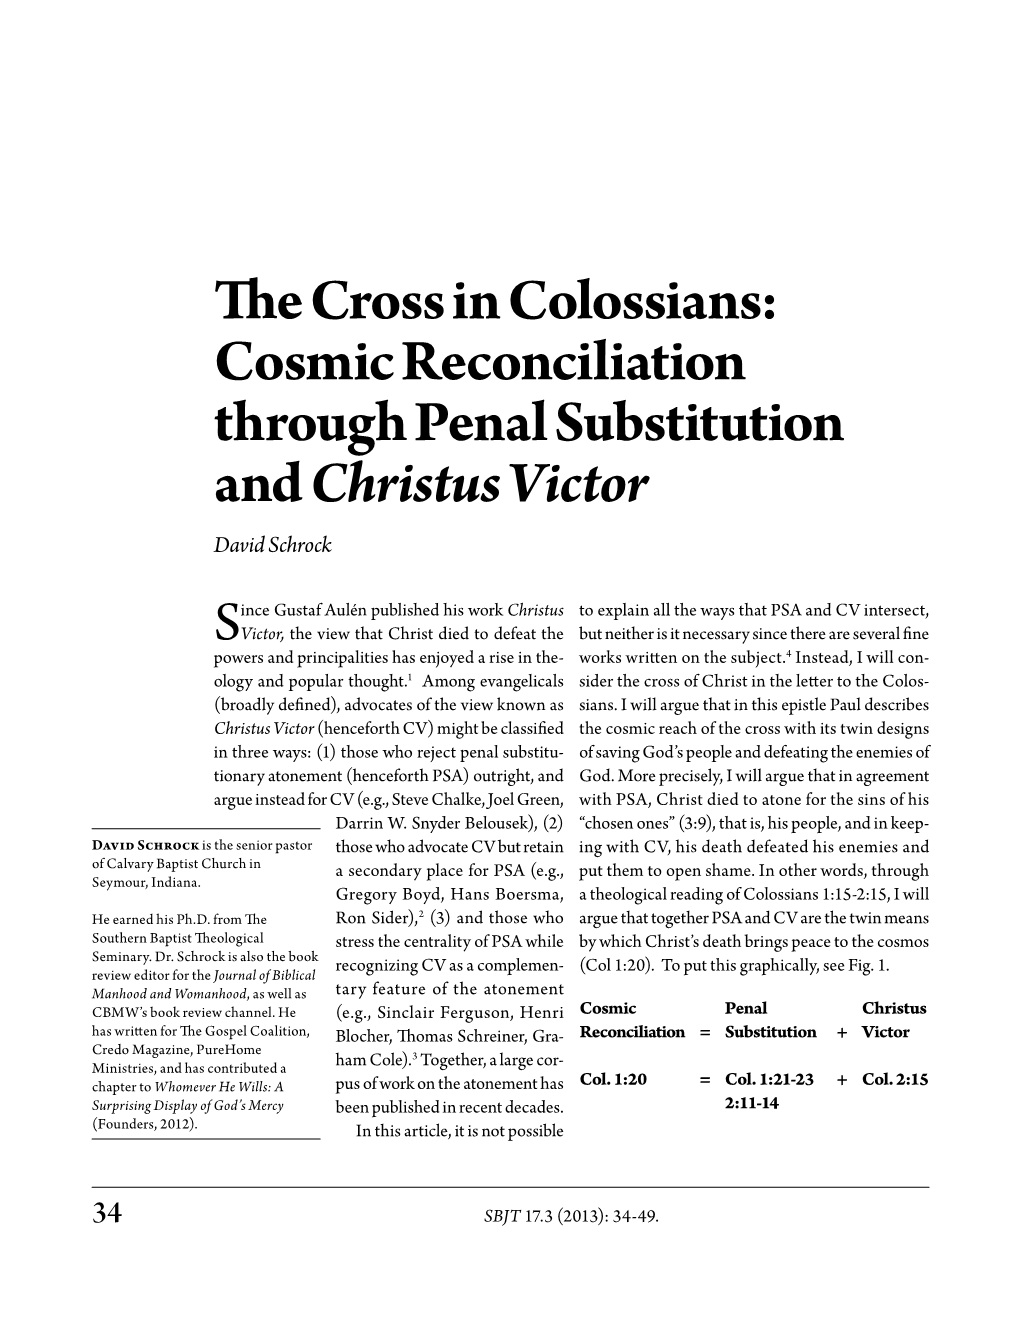 Cosmic Reconciliation Through Penal Substitution and Christus Victor David Schrock